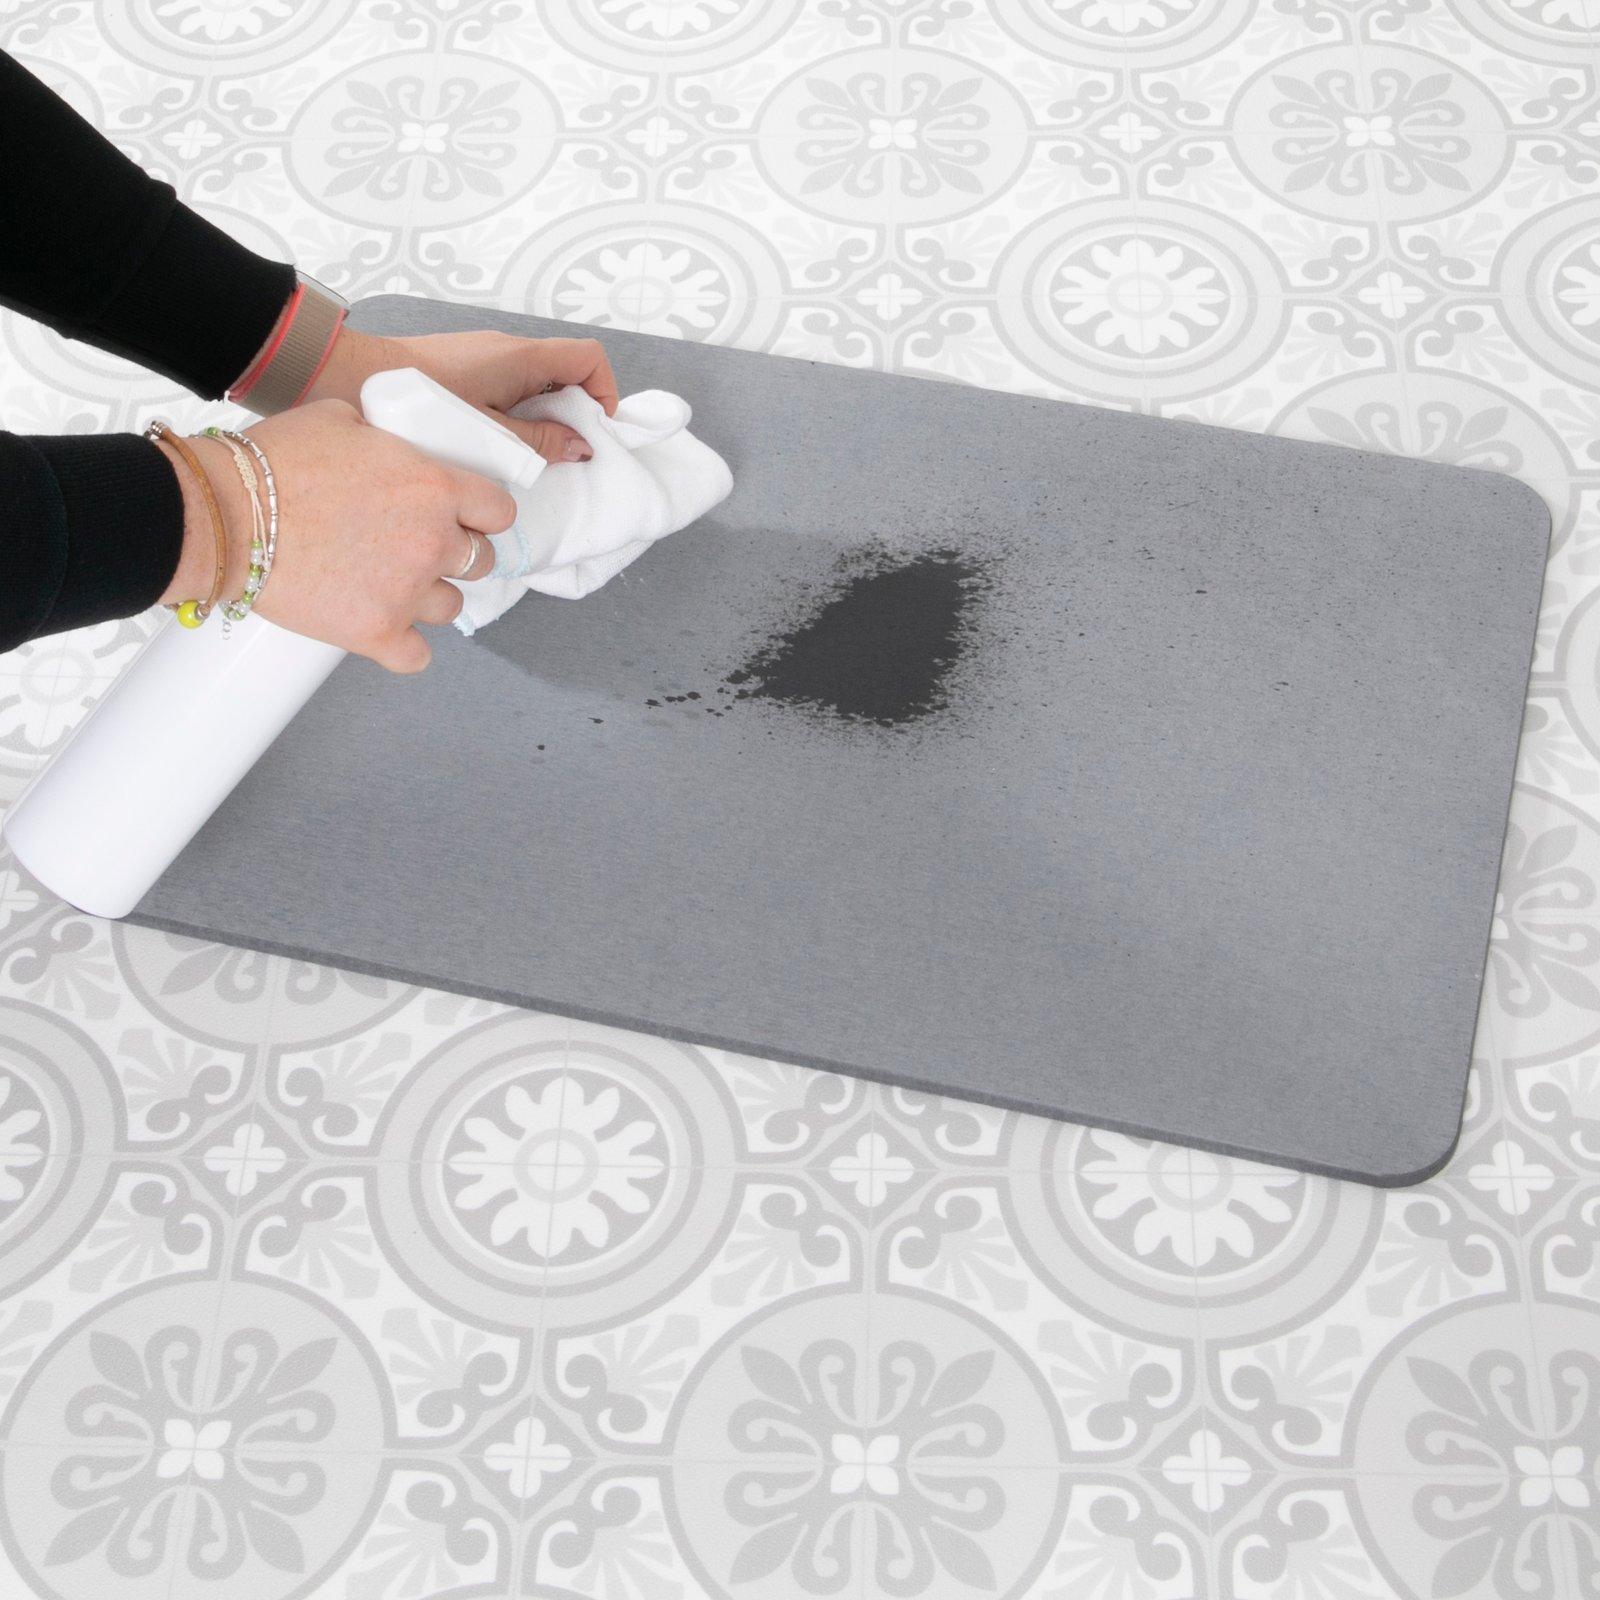 The Bath Mat Is Dead—Here's What a Stylist Says to Use Instead